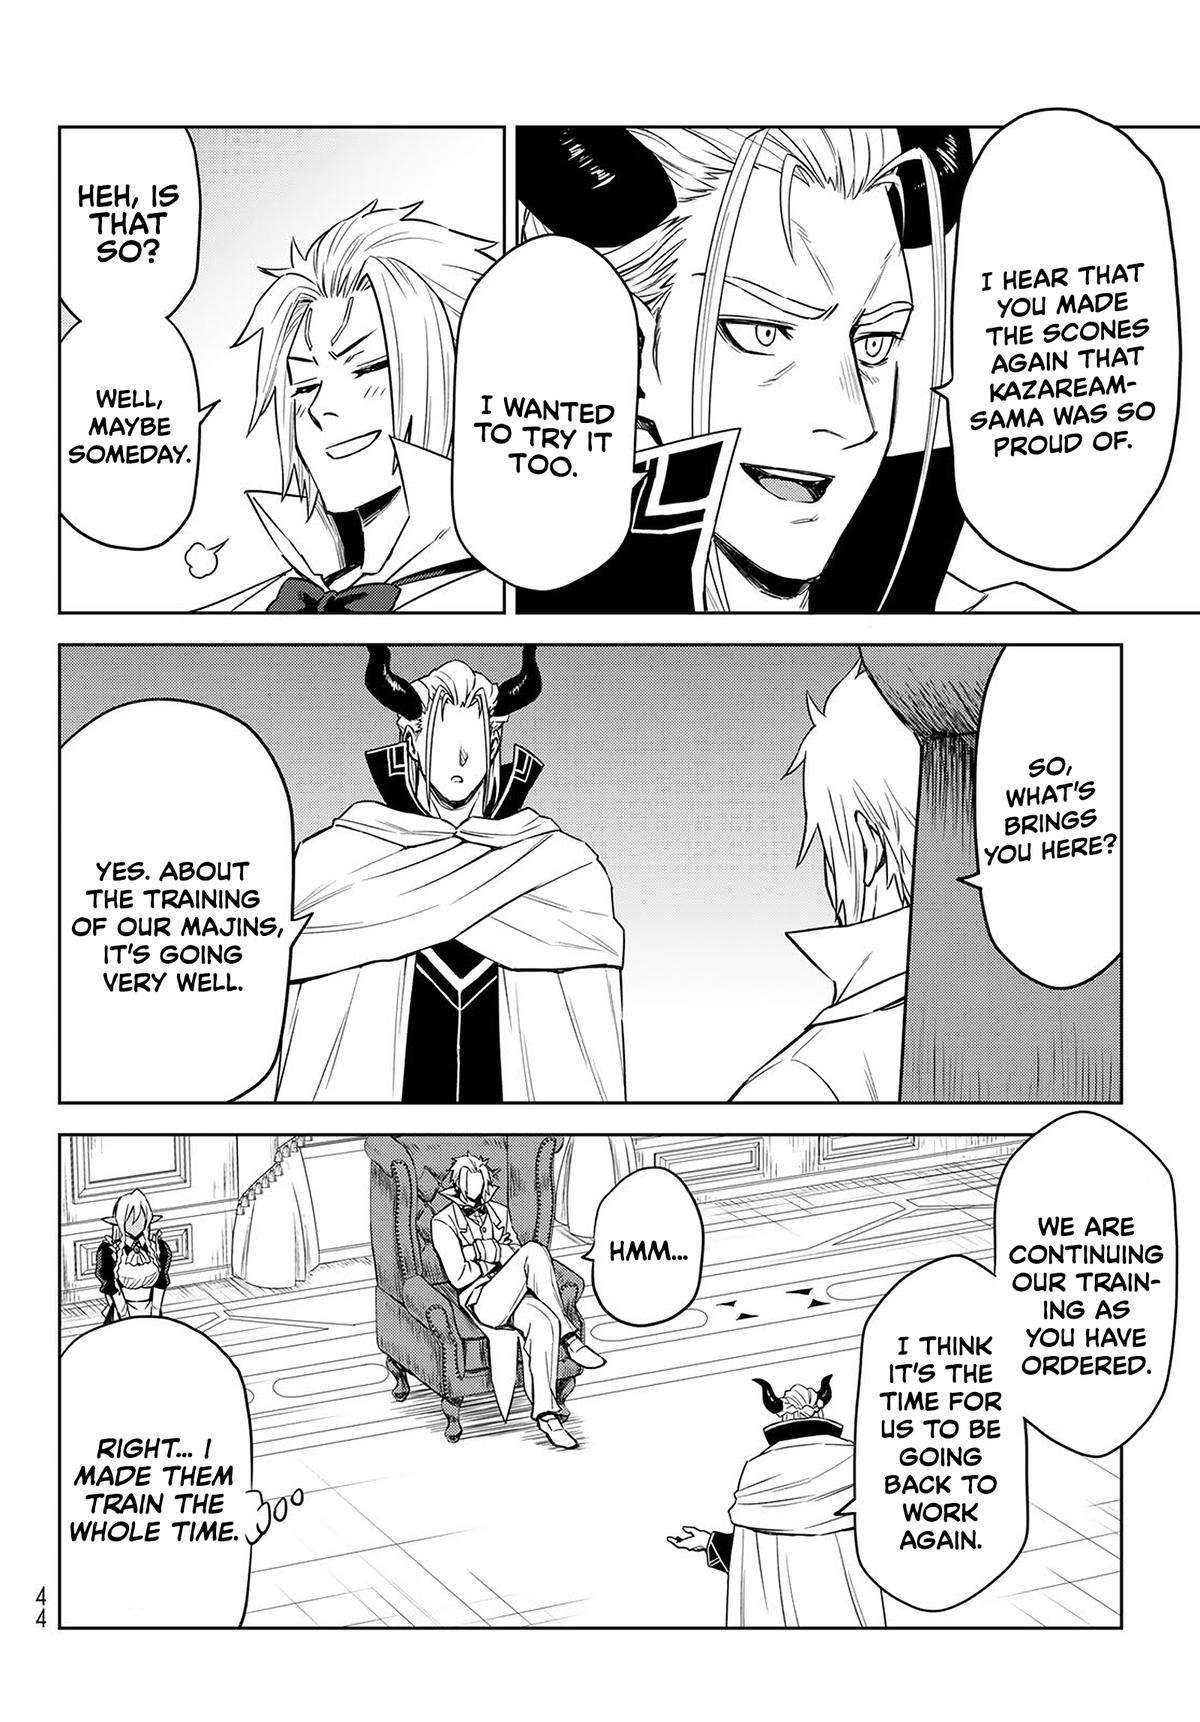 That Time I Got Reincarnated as a Slime - Clayman - chapter 7 - #4